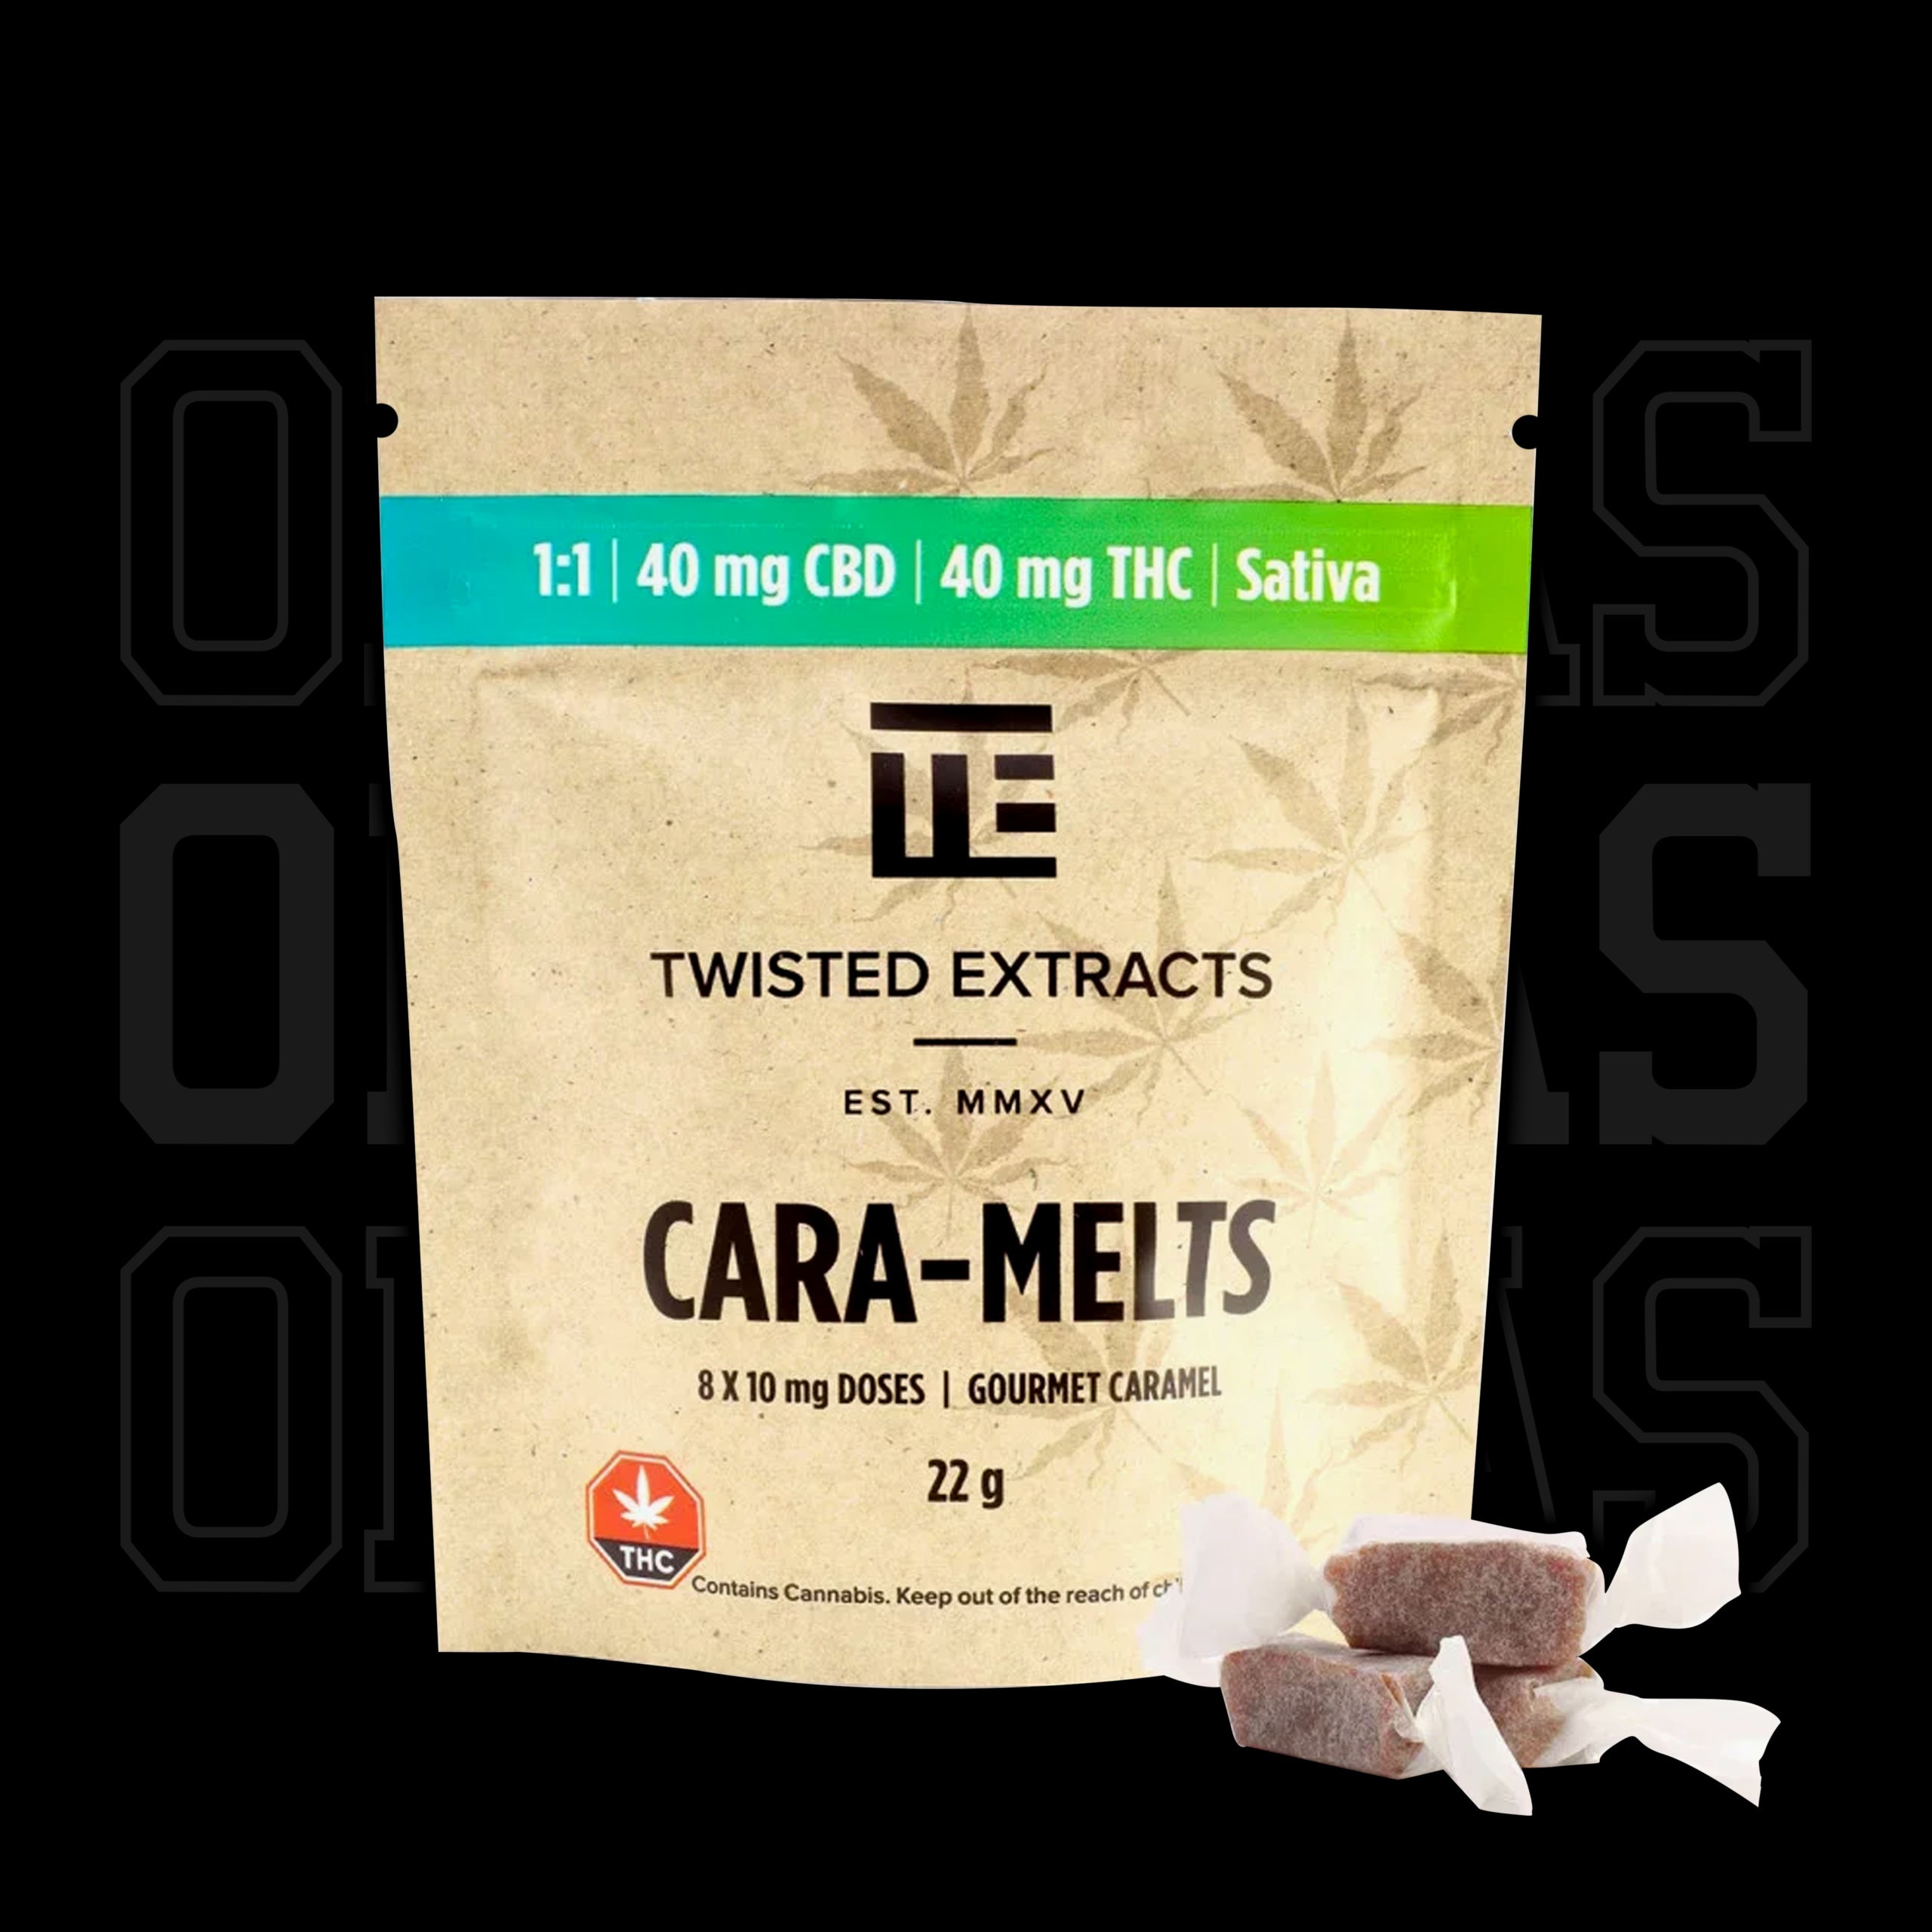 7edibles-twisted-extracts-caramelts-40mg-cbd-40mg-thc-sativa-1024x1024-1